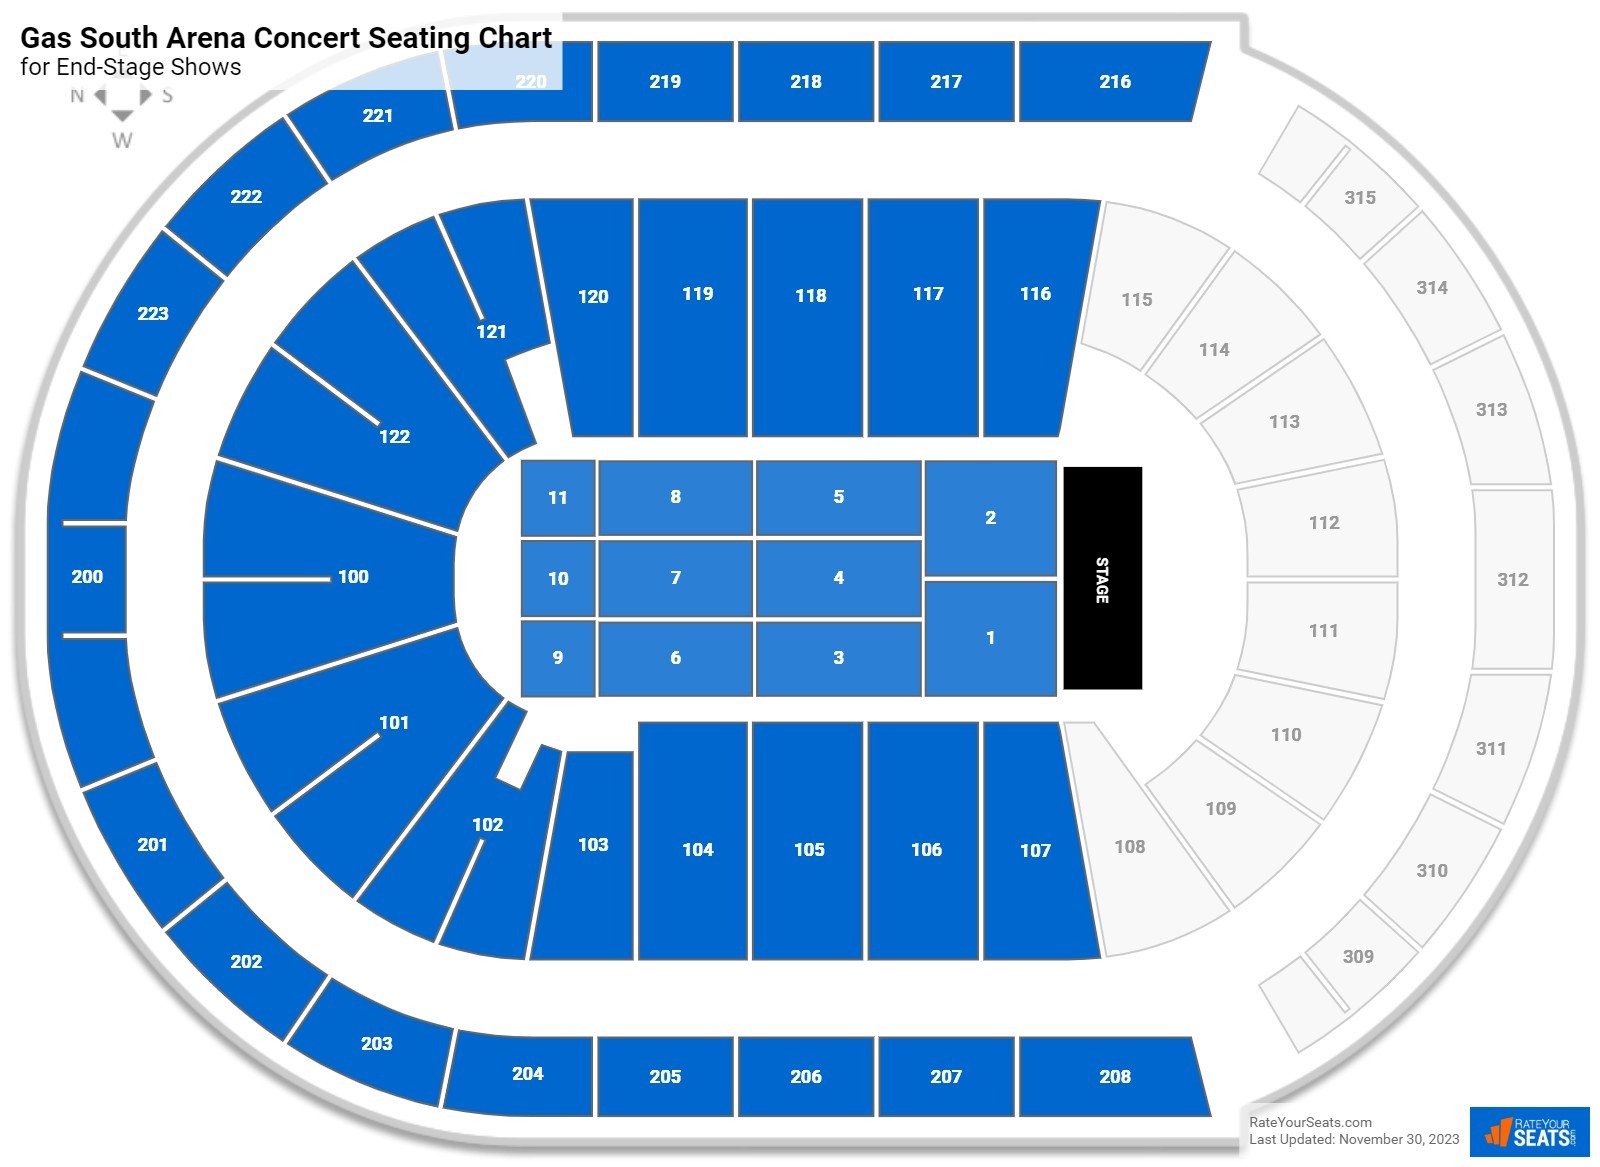 Gas South Arena Concert Seating Chart